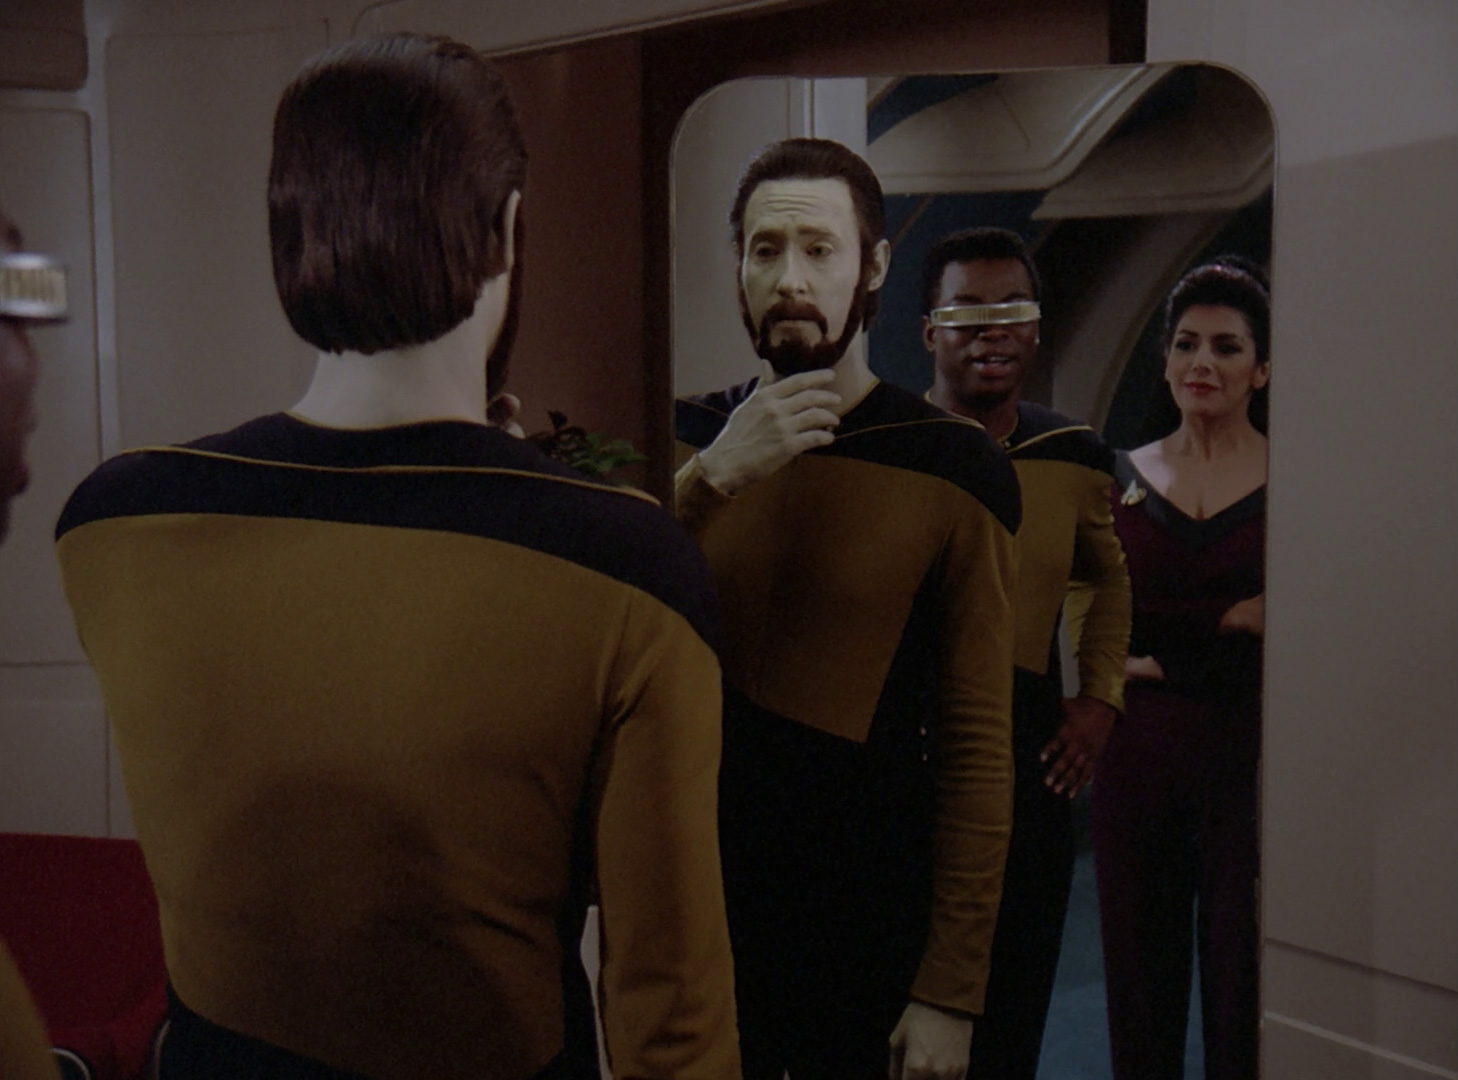 Data looking at his new beard in the mirror, while Geordi and Troi watch